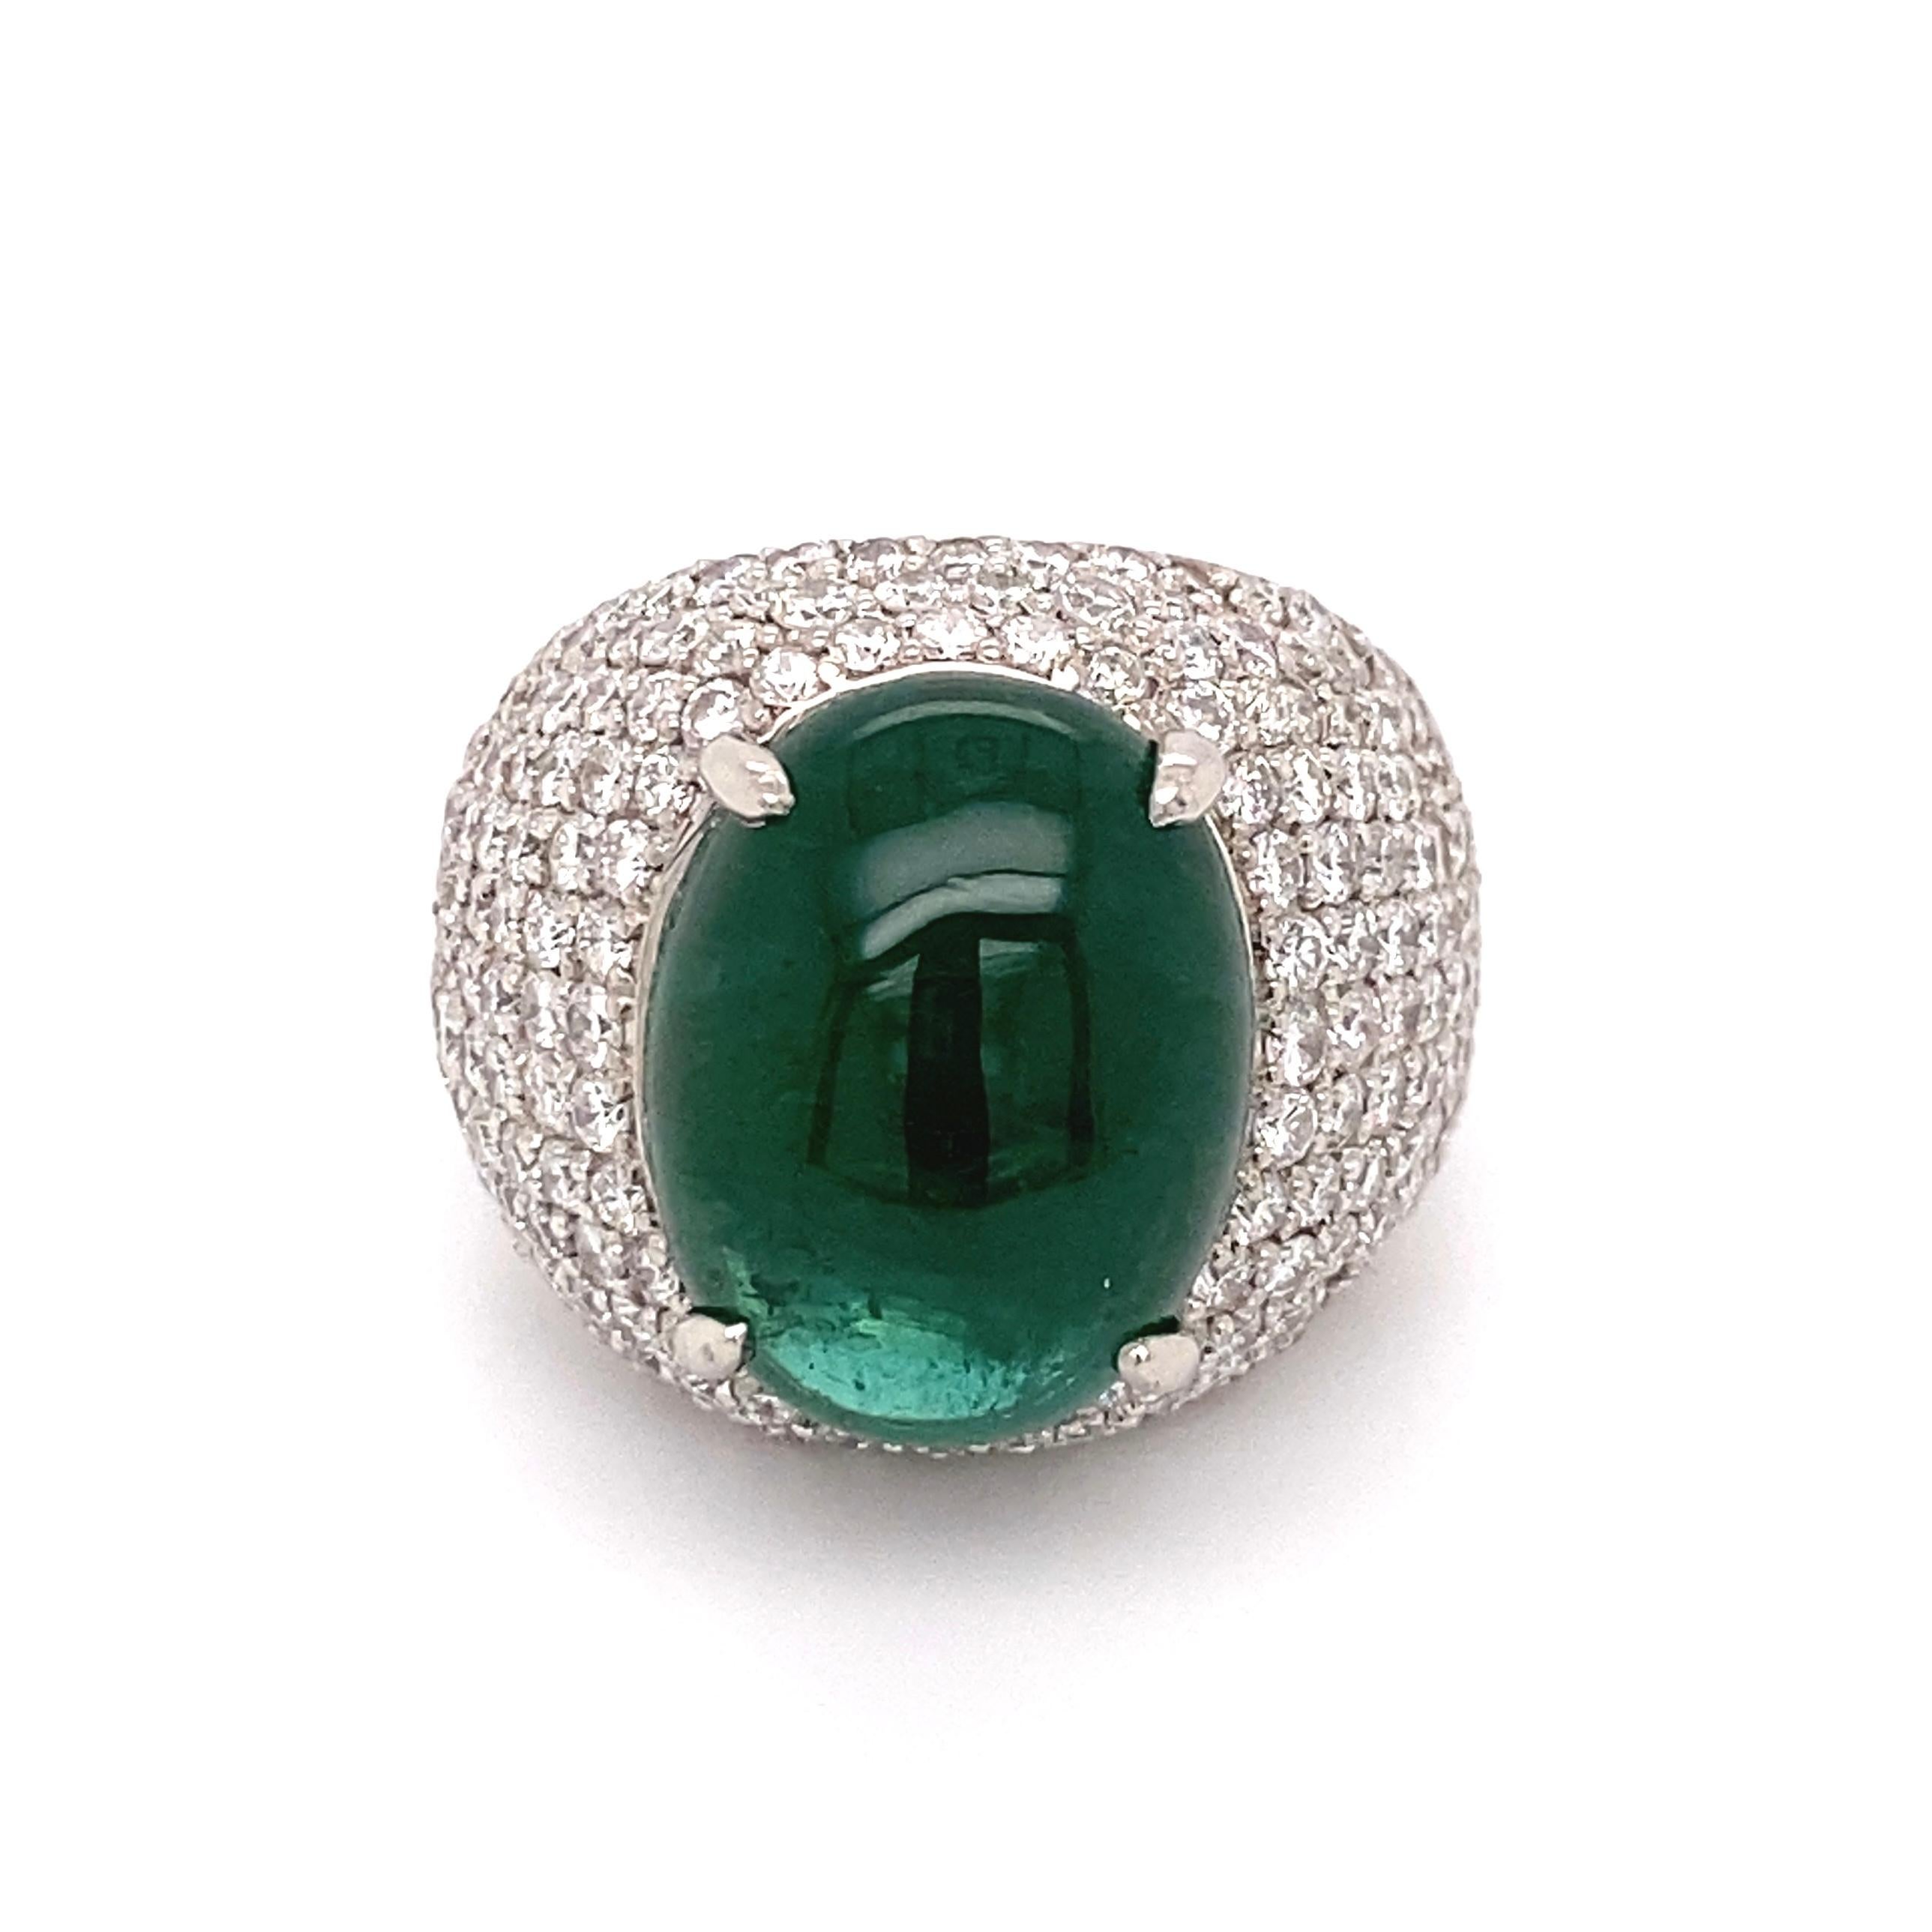 9.51 Carat Emerald GIA and Diamond Pave Platinum Dome Ring Estate Fine Jewelry In Excellent Condition For Sale In Montreal, QC